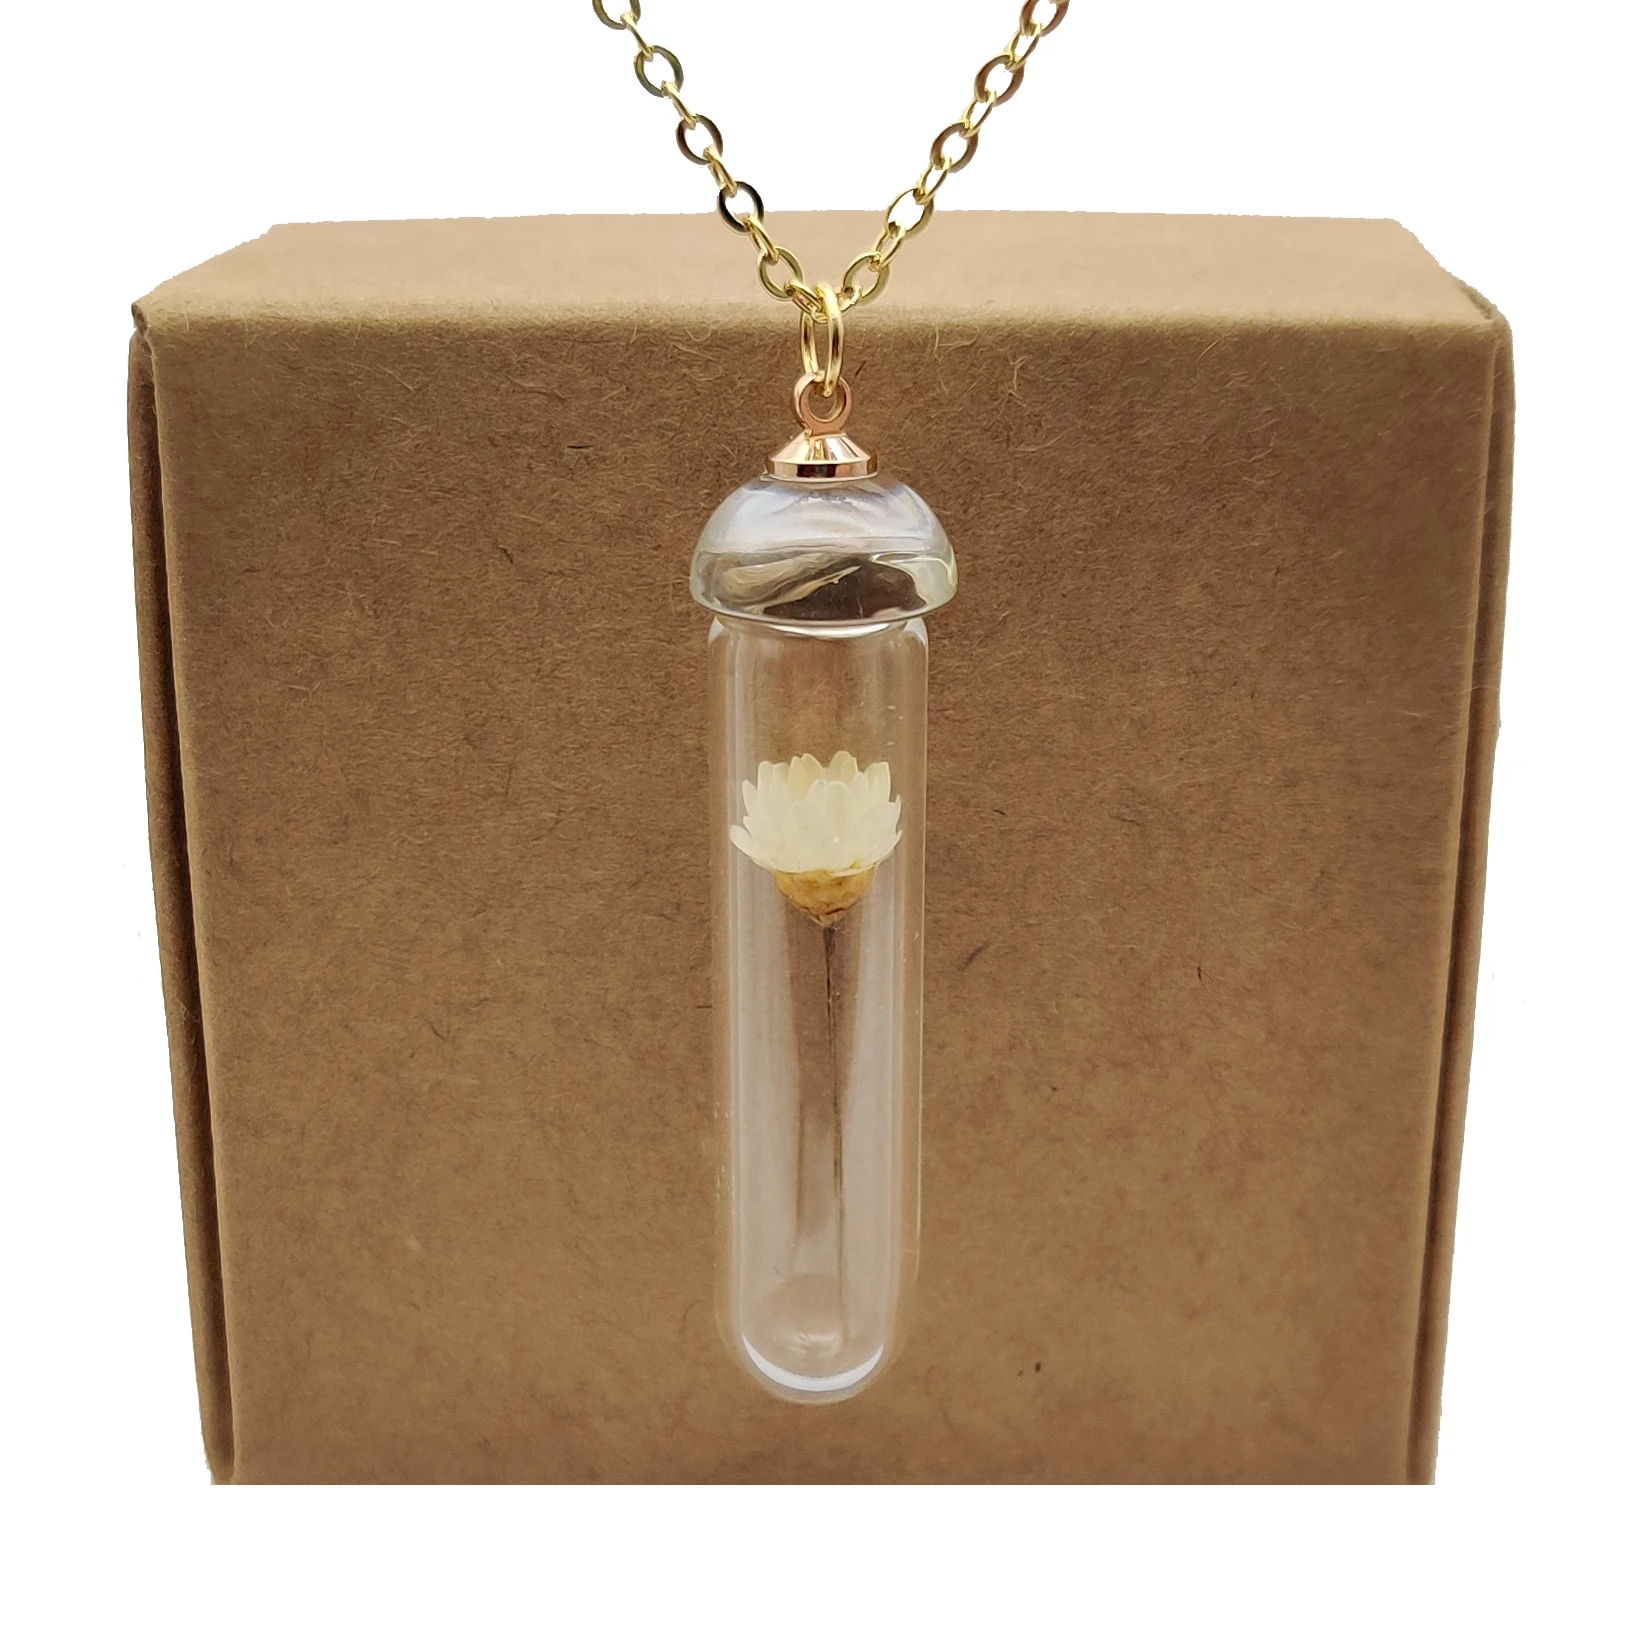 Daisy Ivory Transparent Glass Bottle Pendant Gold Color Chain Long Necklace Women Boho Fashion Jewelry Bohemian Vintage Handmade 30ml frosted vitreous refillable cream glass empty bottle face essence products jewelry display cosmetics vials 6pcs